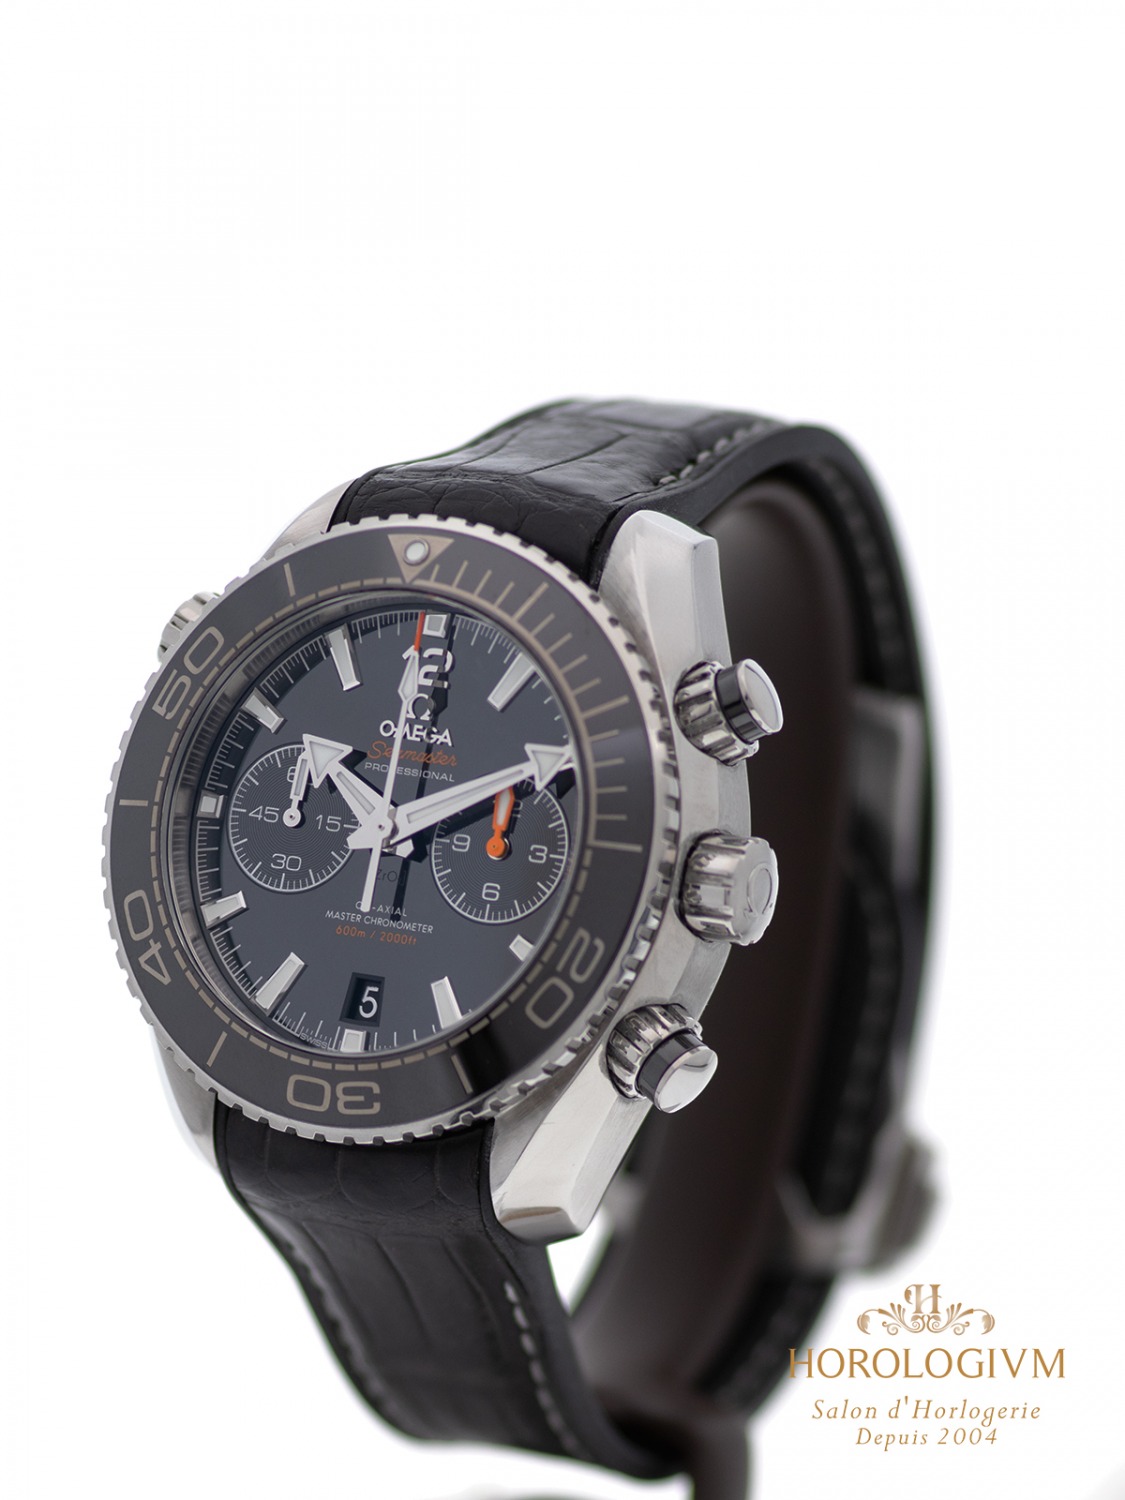 Omega Seamaster Planet Ocean Co-Axial Chronograph 600M, watch, silver (case) and silver & black (bezel)